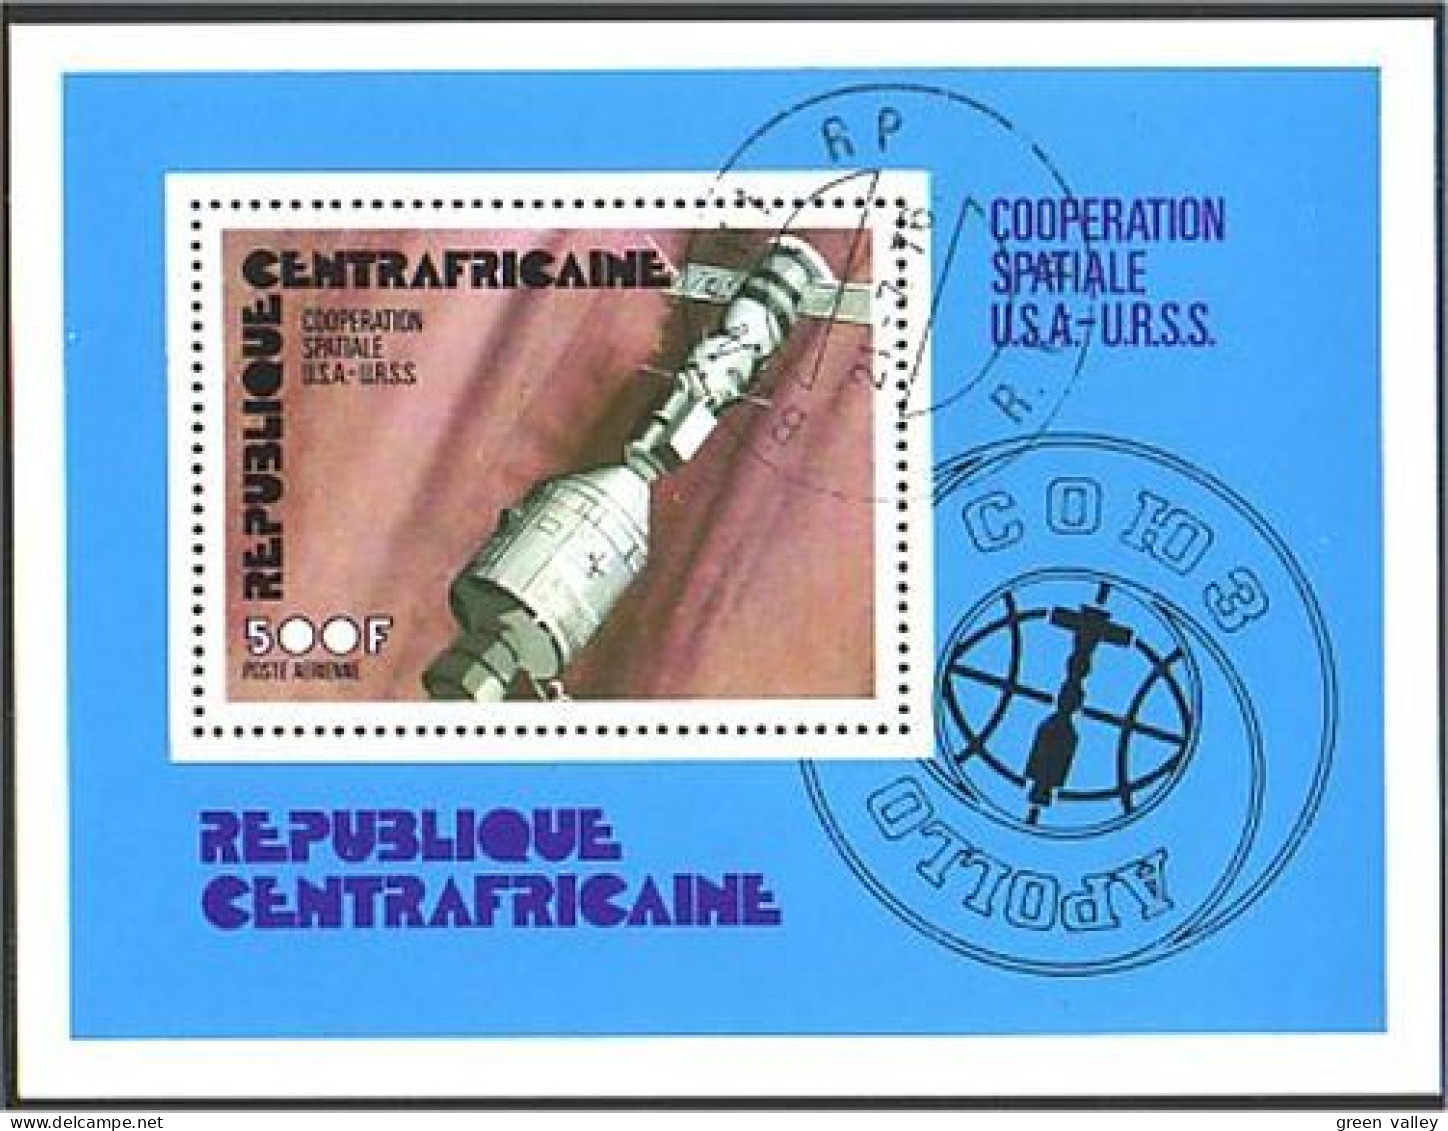 Centrafrique Cooperation Spatiale USA-URSS (A51-461) - Independecia USA